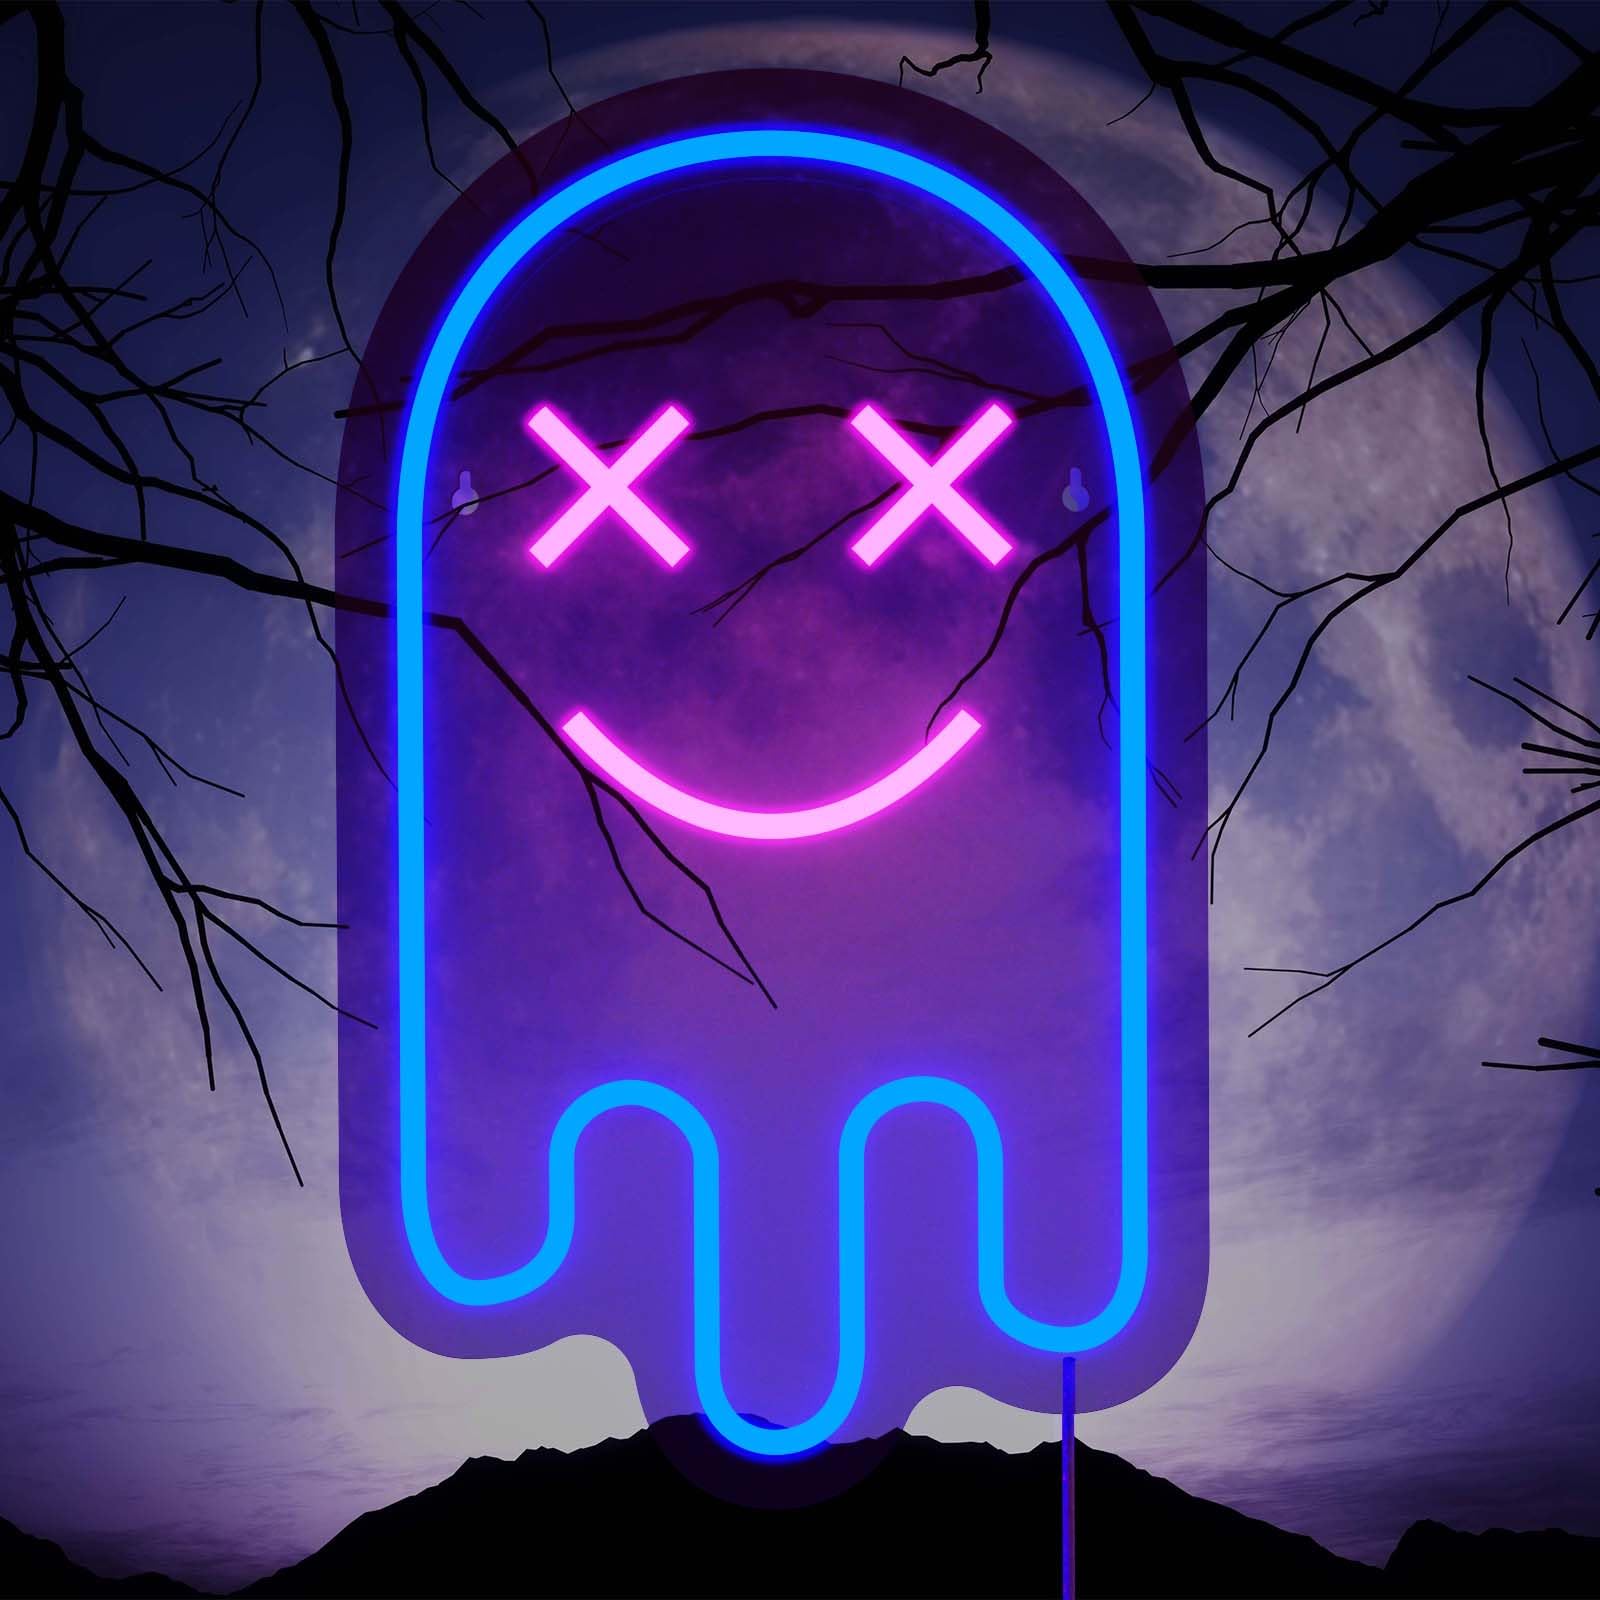  Neon Coole Hintergrundbild 1600x1600. Amazon.com : Halloween Ghost Neon Sign Pink Blue Sign Wall Halloween Decor for Aesthetic Bedroom, Game Room, Man Cave, Neon Cool Party Decor. Birthday Party Decor Gift